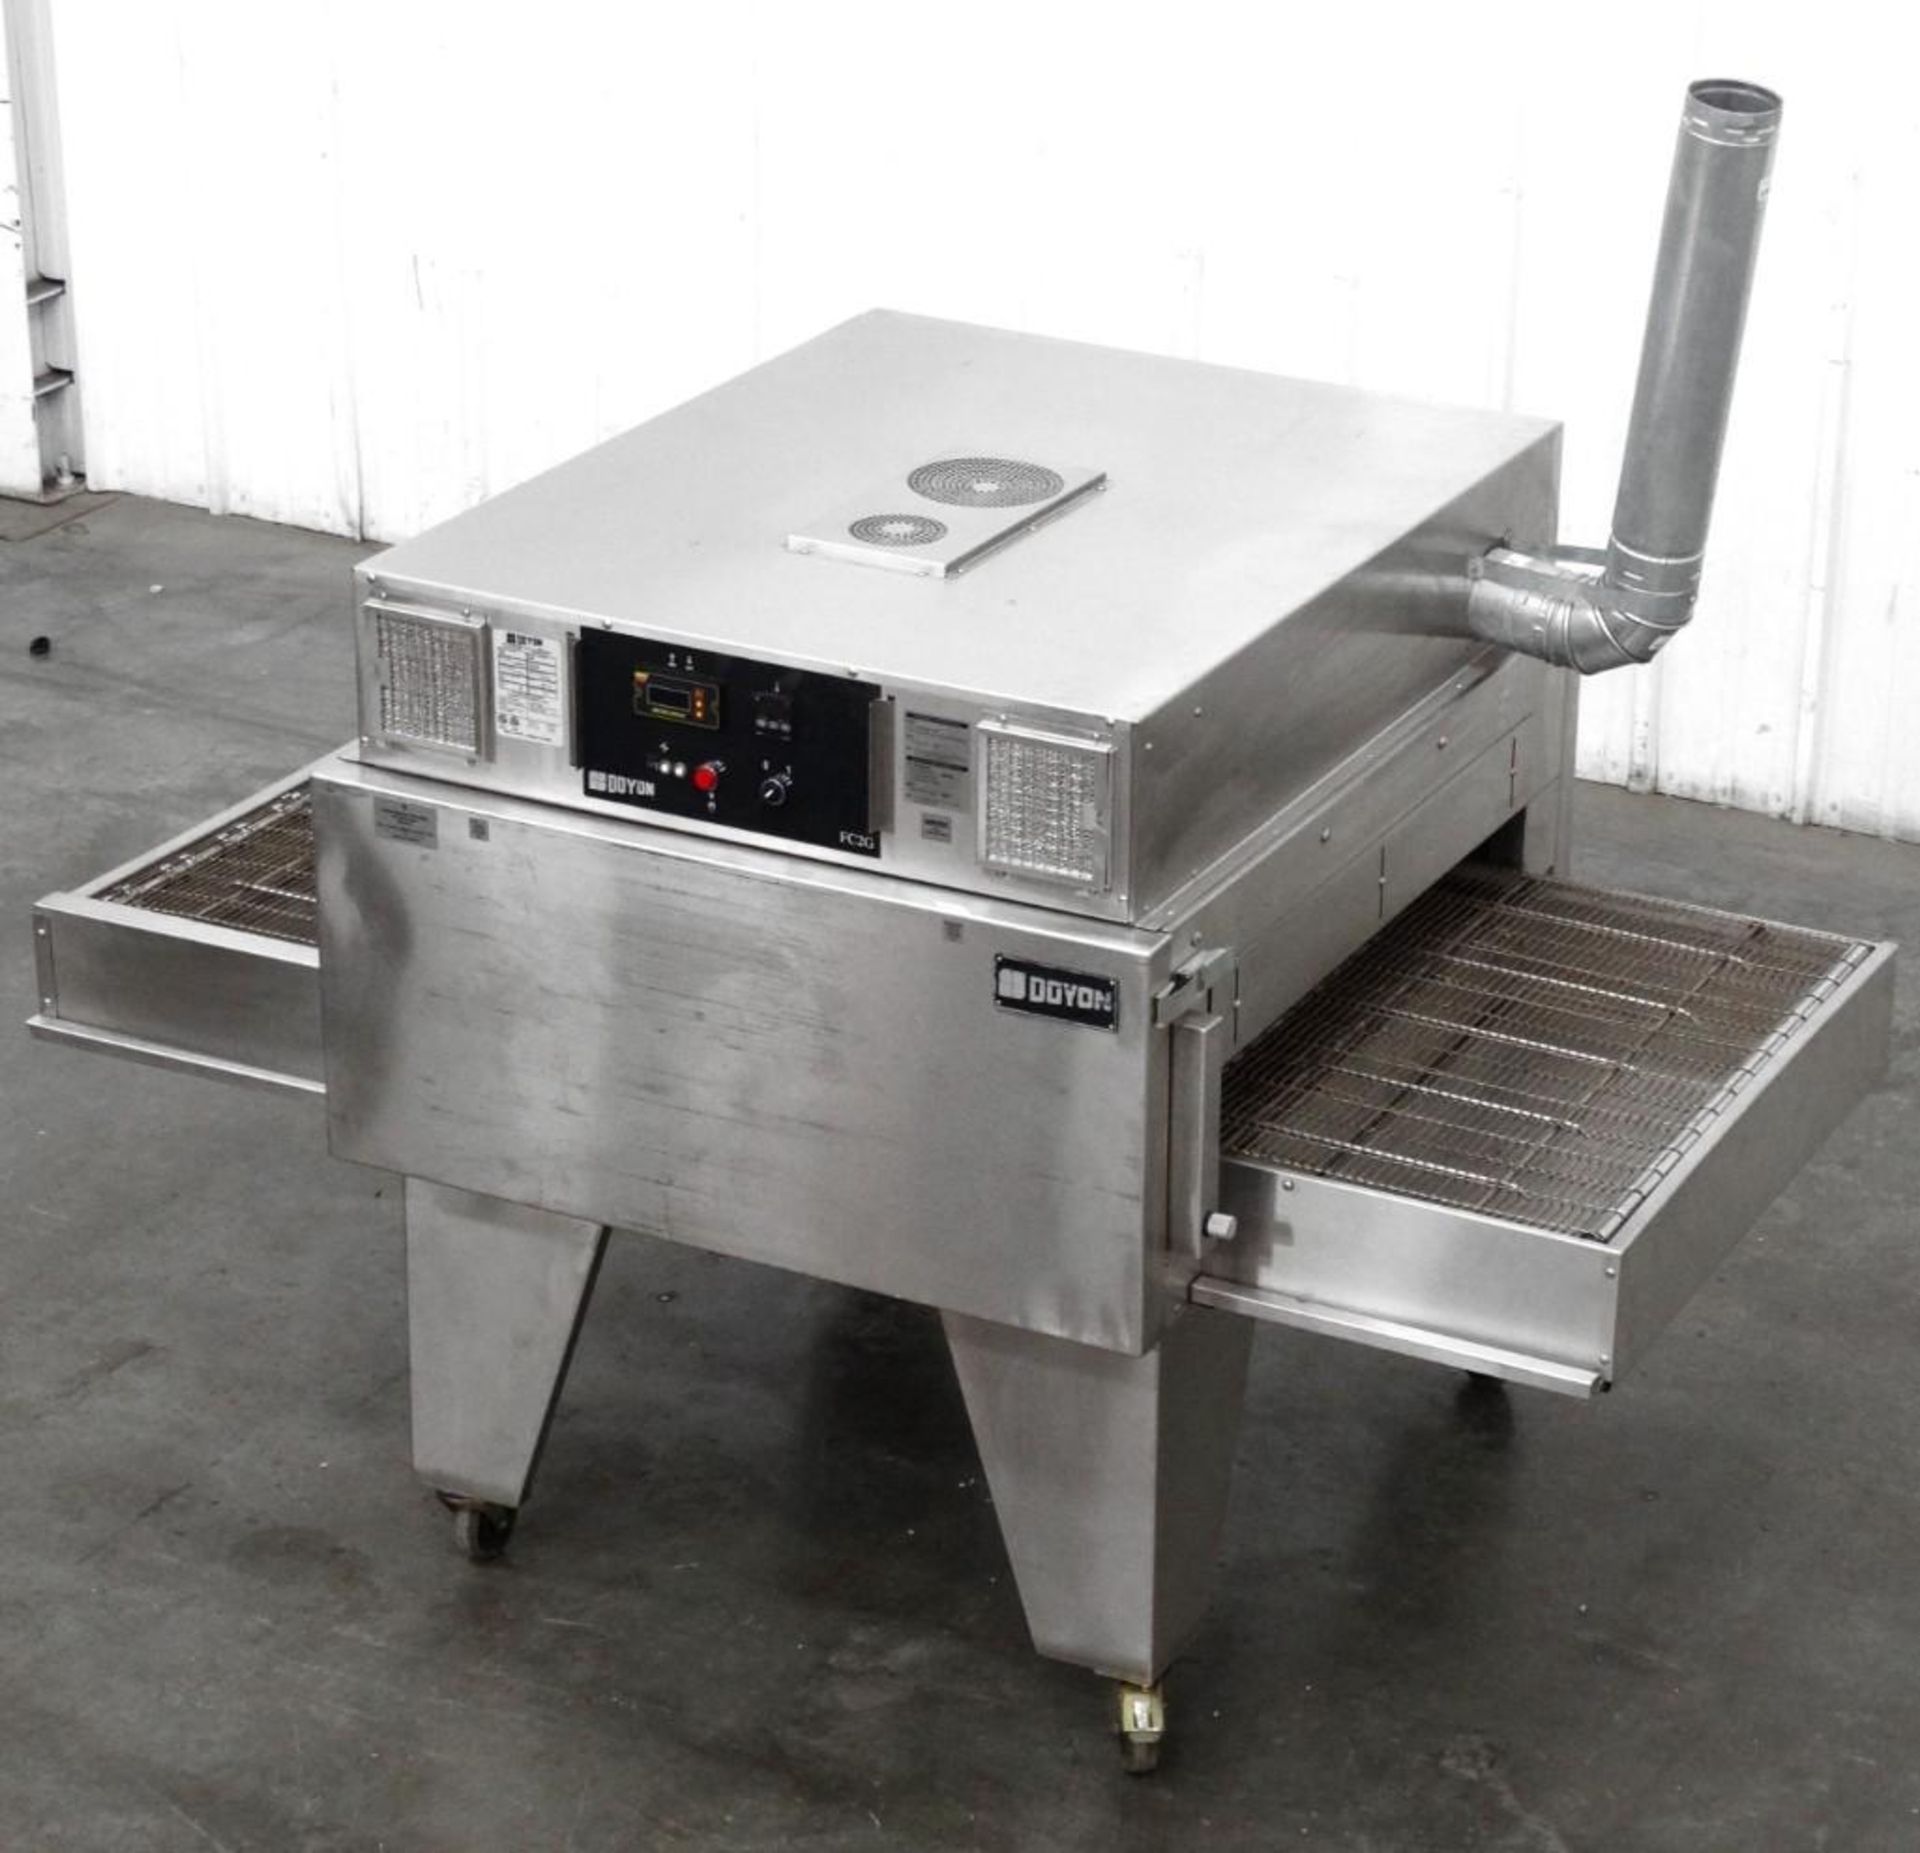 Doyon FC2G Gas Fired Conveyor Oven - Image 4 of 7